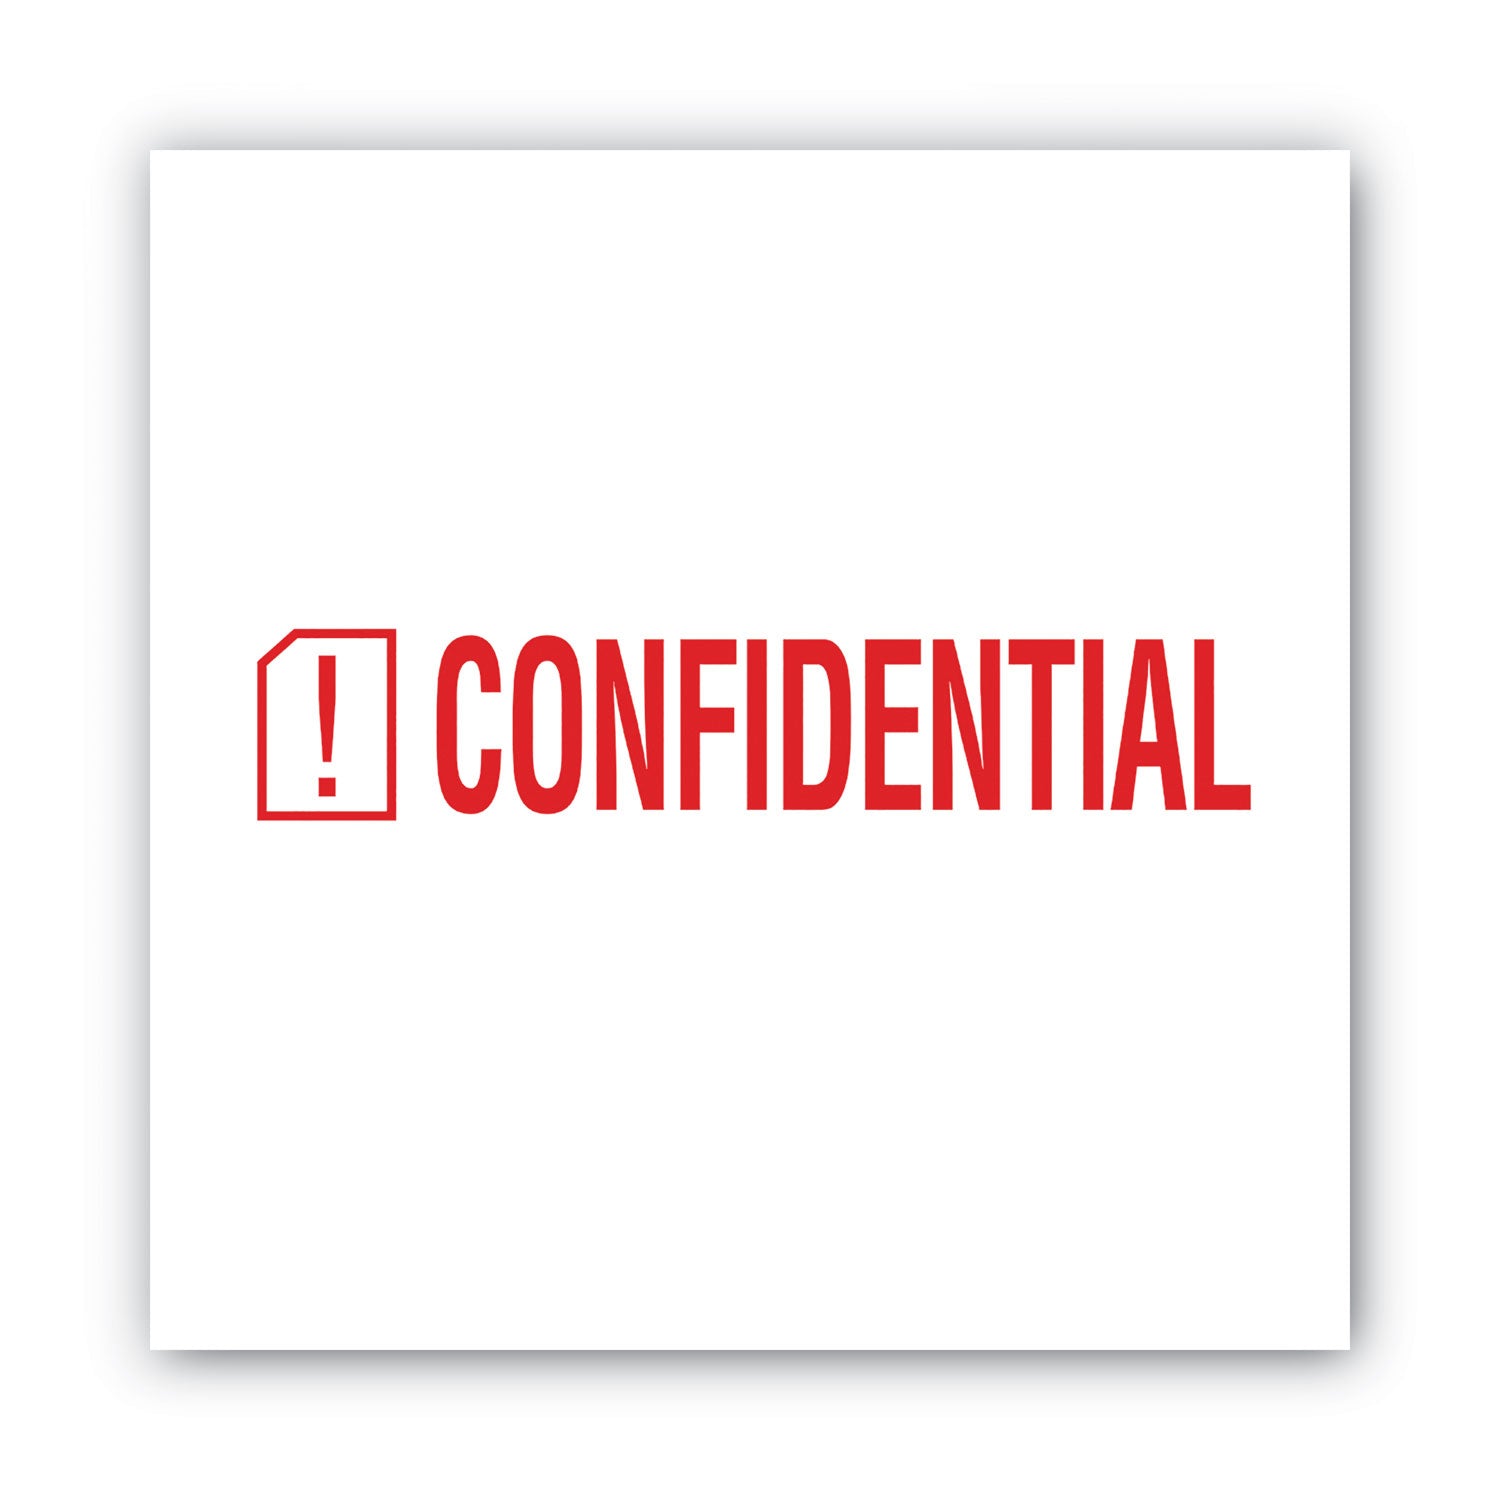 Pre-Inked Shutter Stamp, Red, CONFIDENTIAL, 1.63 x 0.5 - 